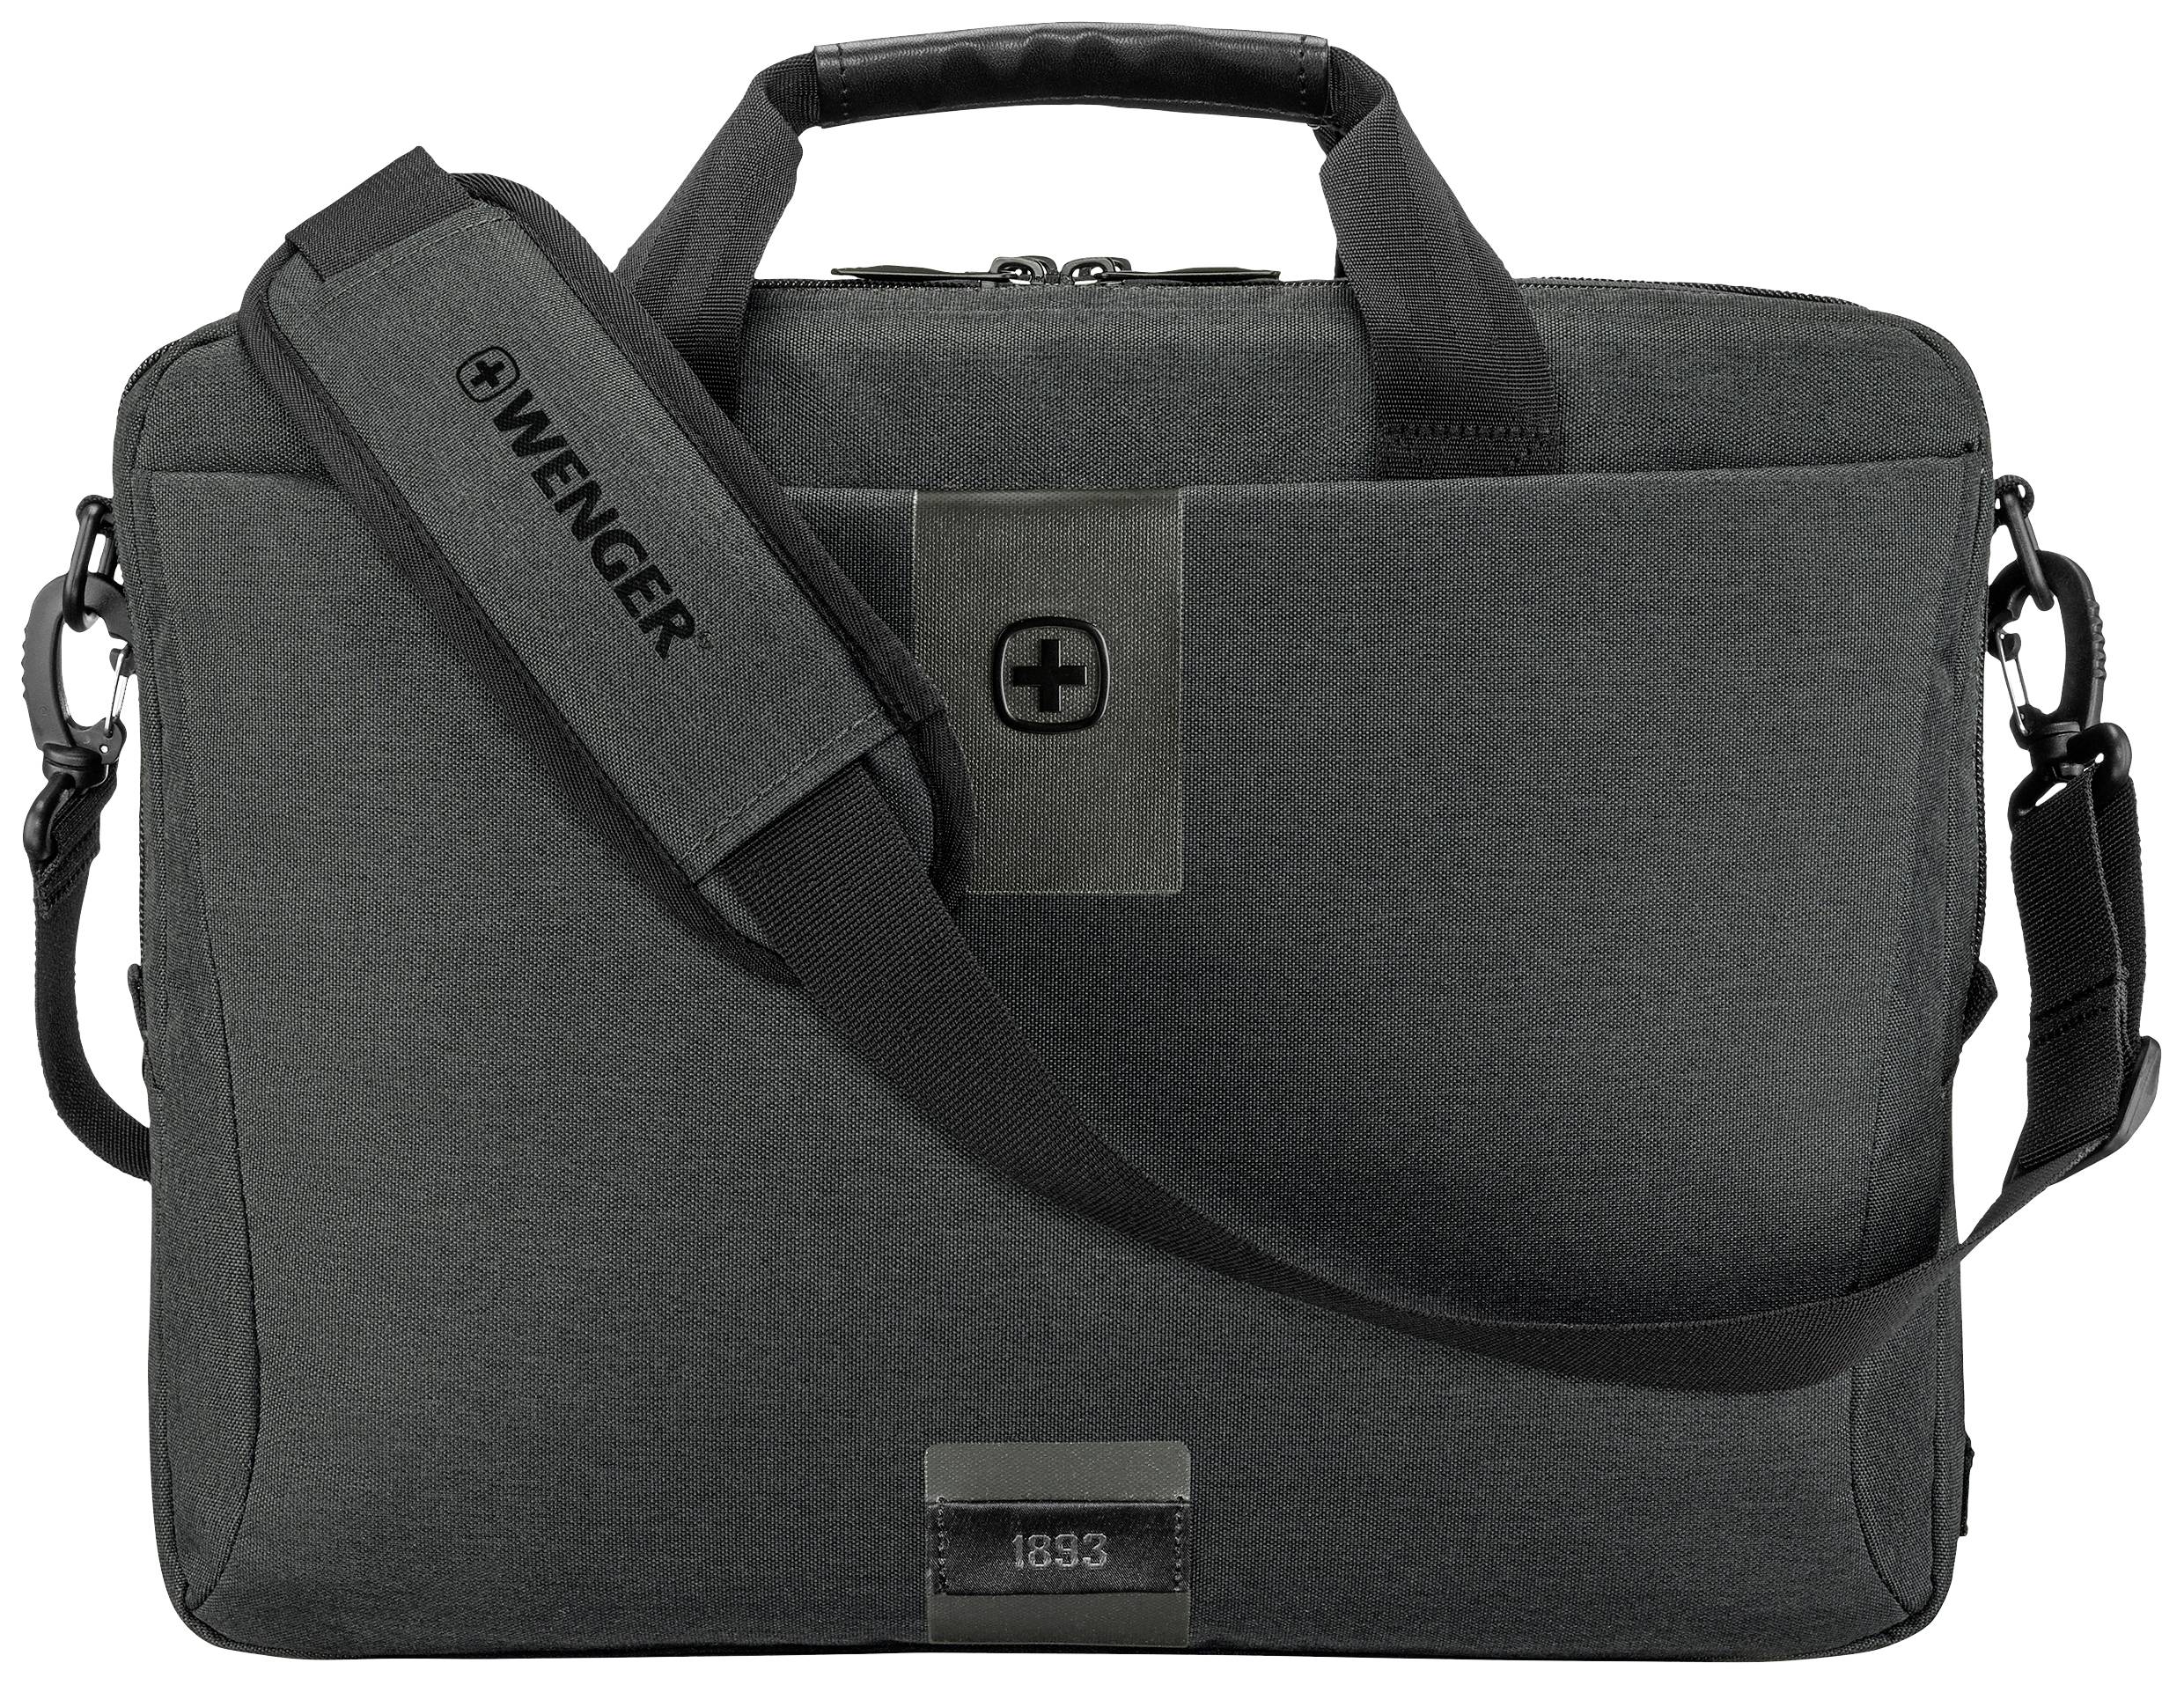 WENGER MX ECO Brief, 16\" Laptop Briefcase, Charcoal